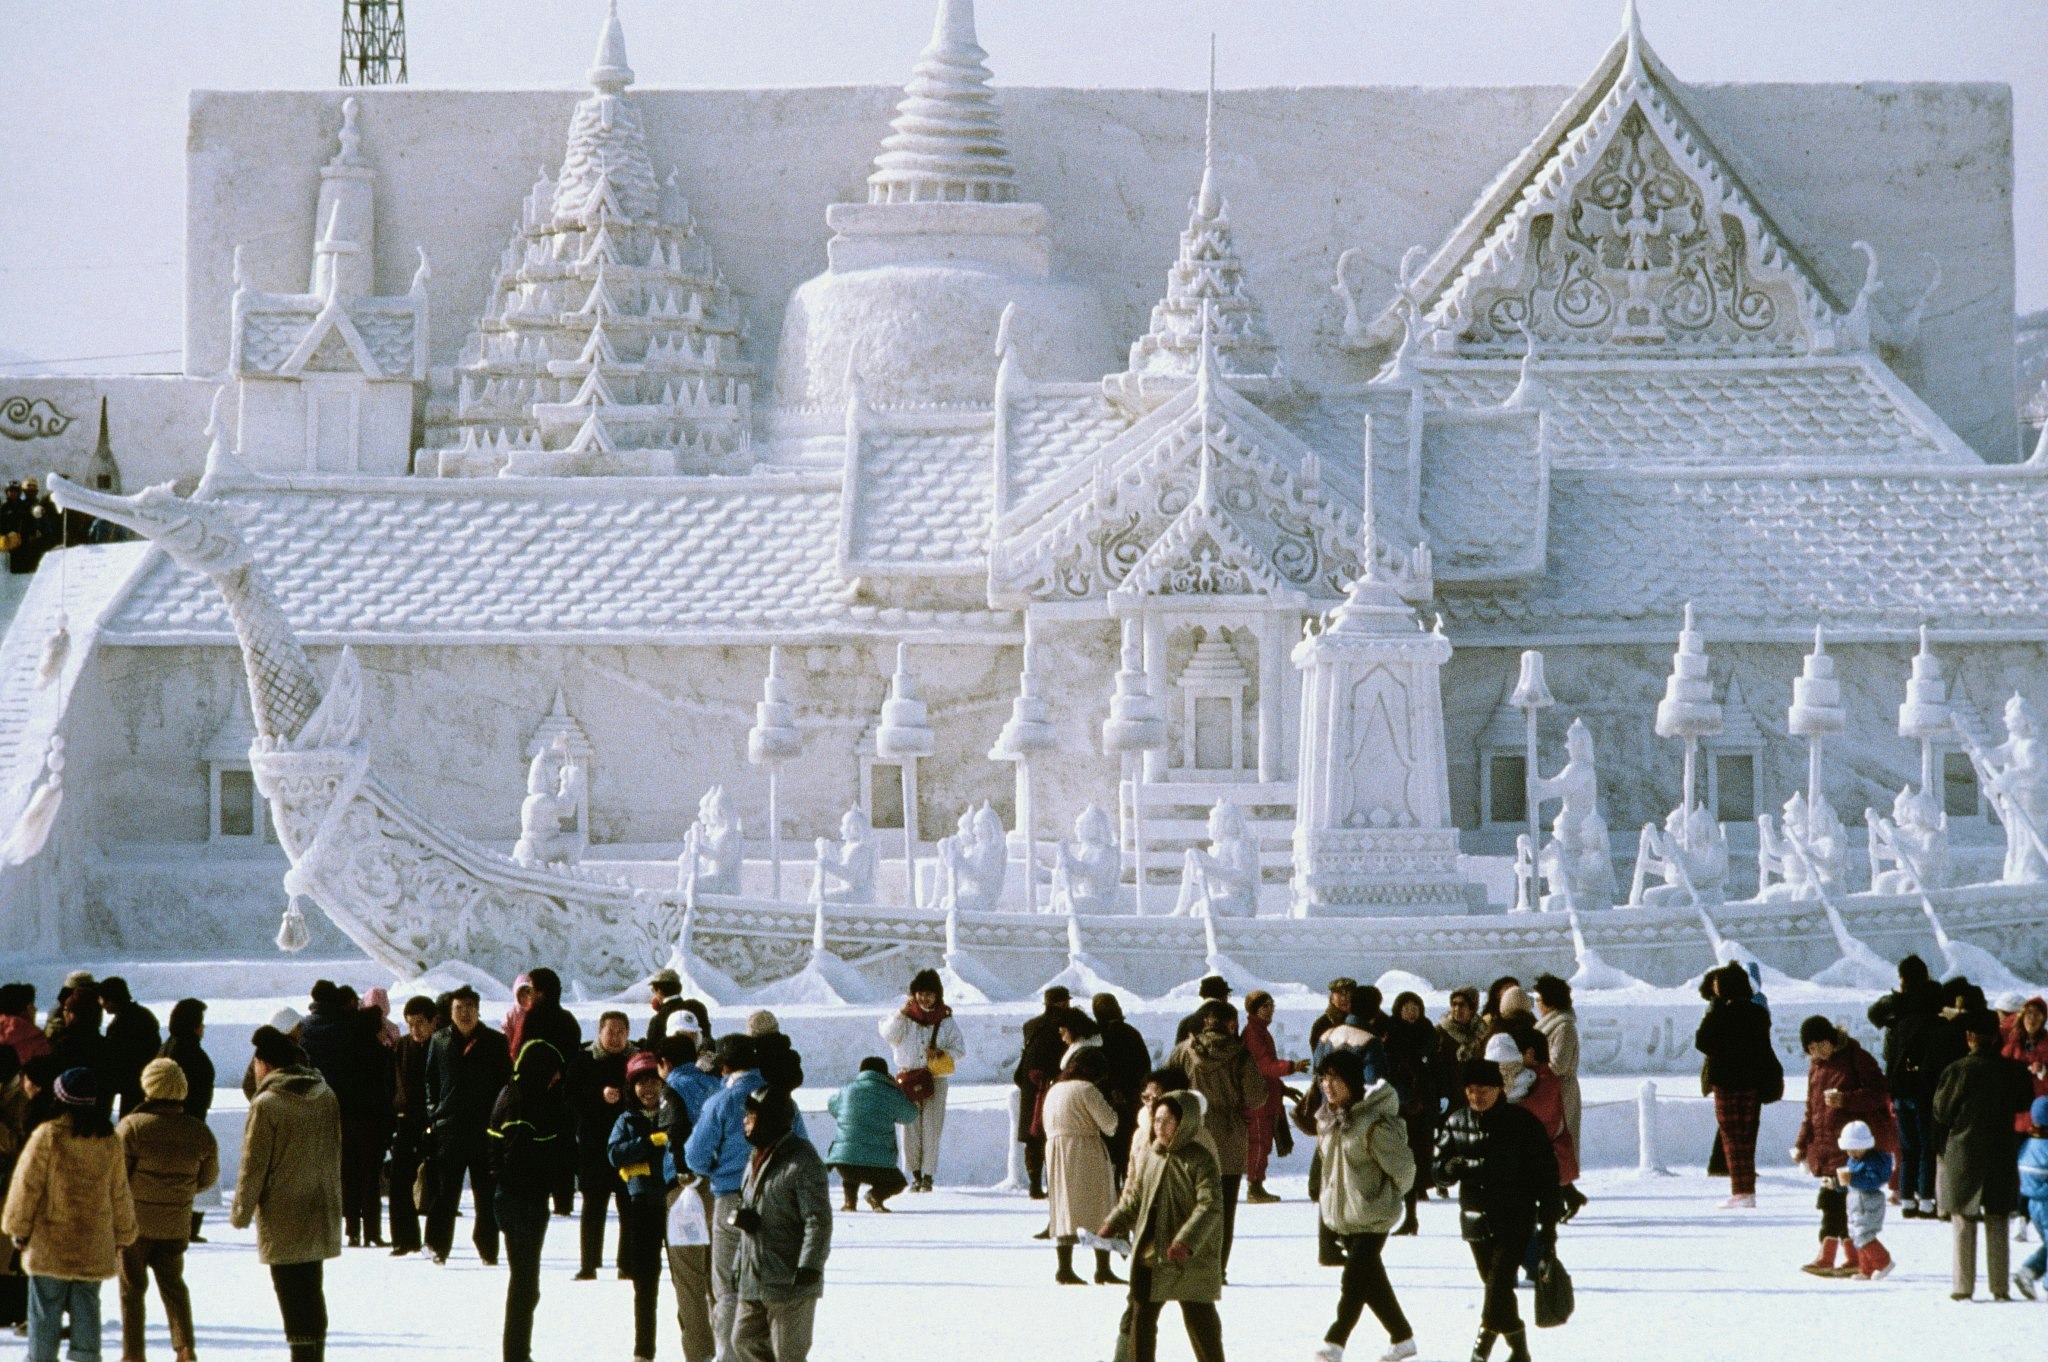 Tourists in front of a snow-sculpted palace at the Sapporo Snow Festival in Hokkaido.